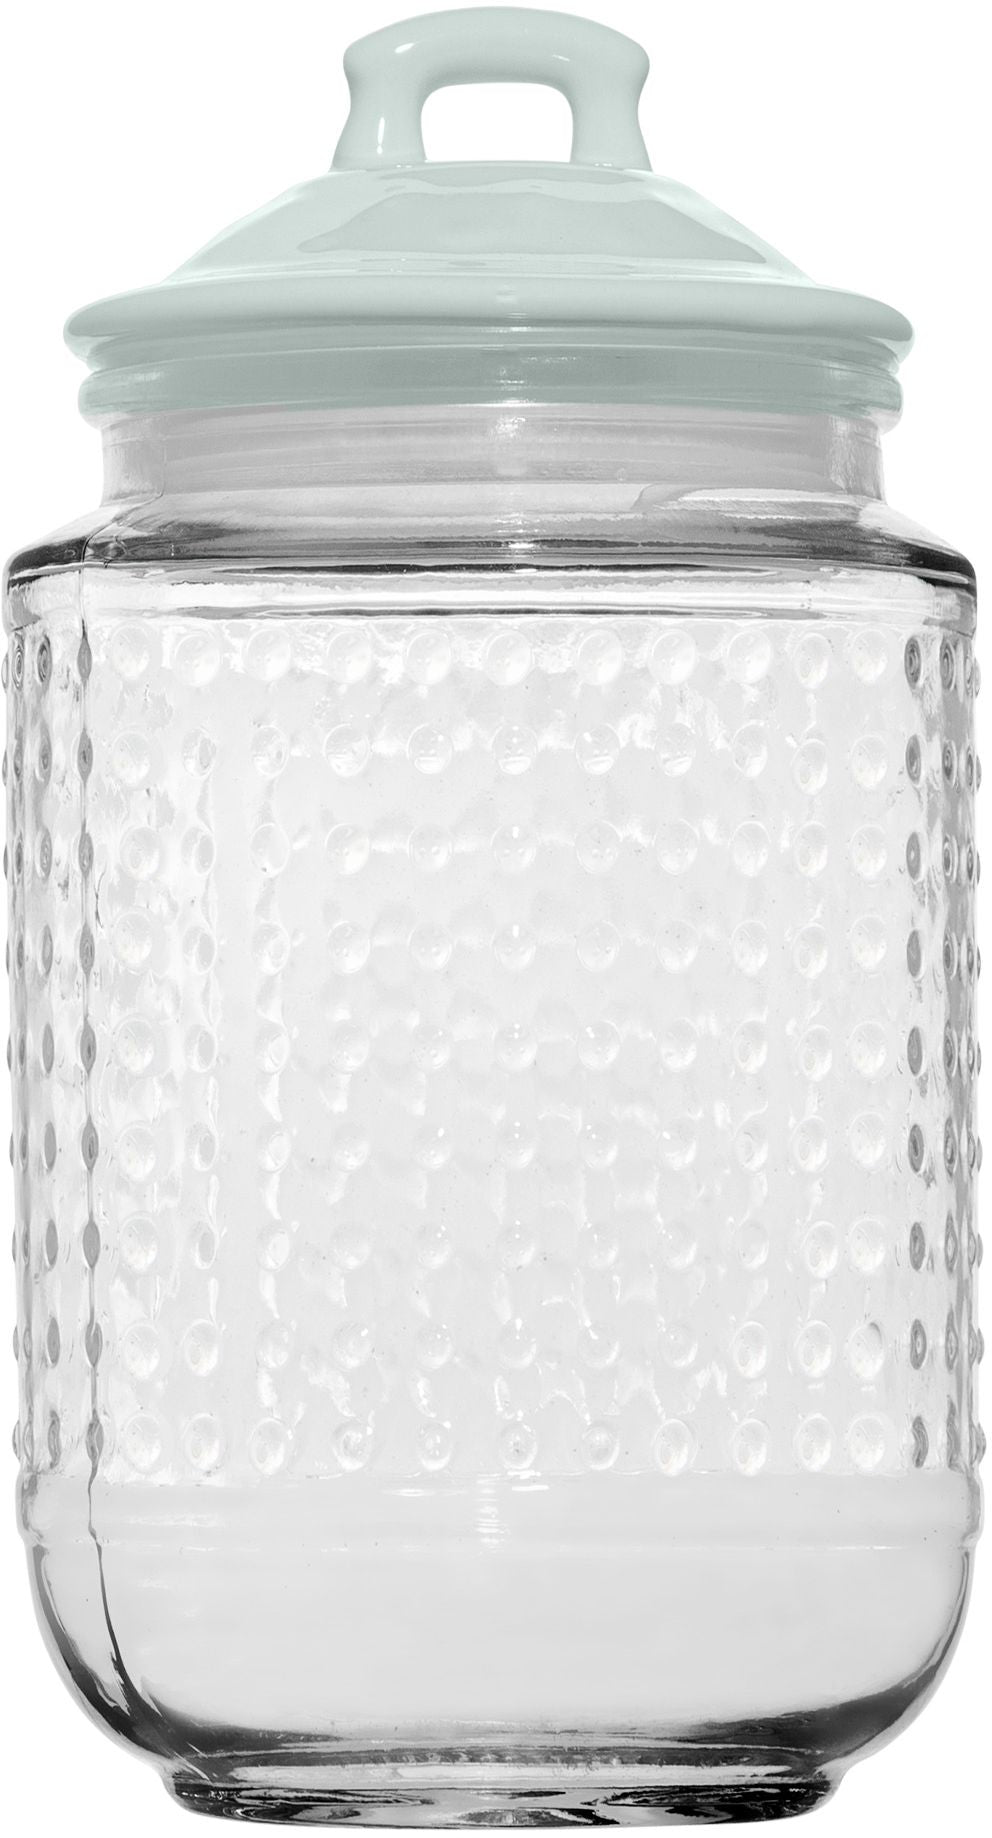 Magnolia Bakery Glass Hobnail Canister (M - Mint)